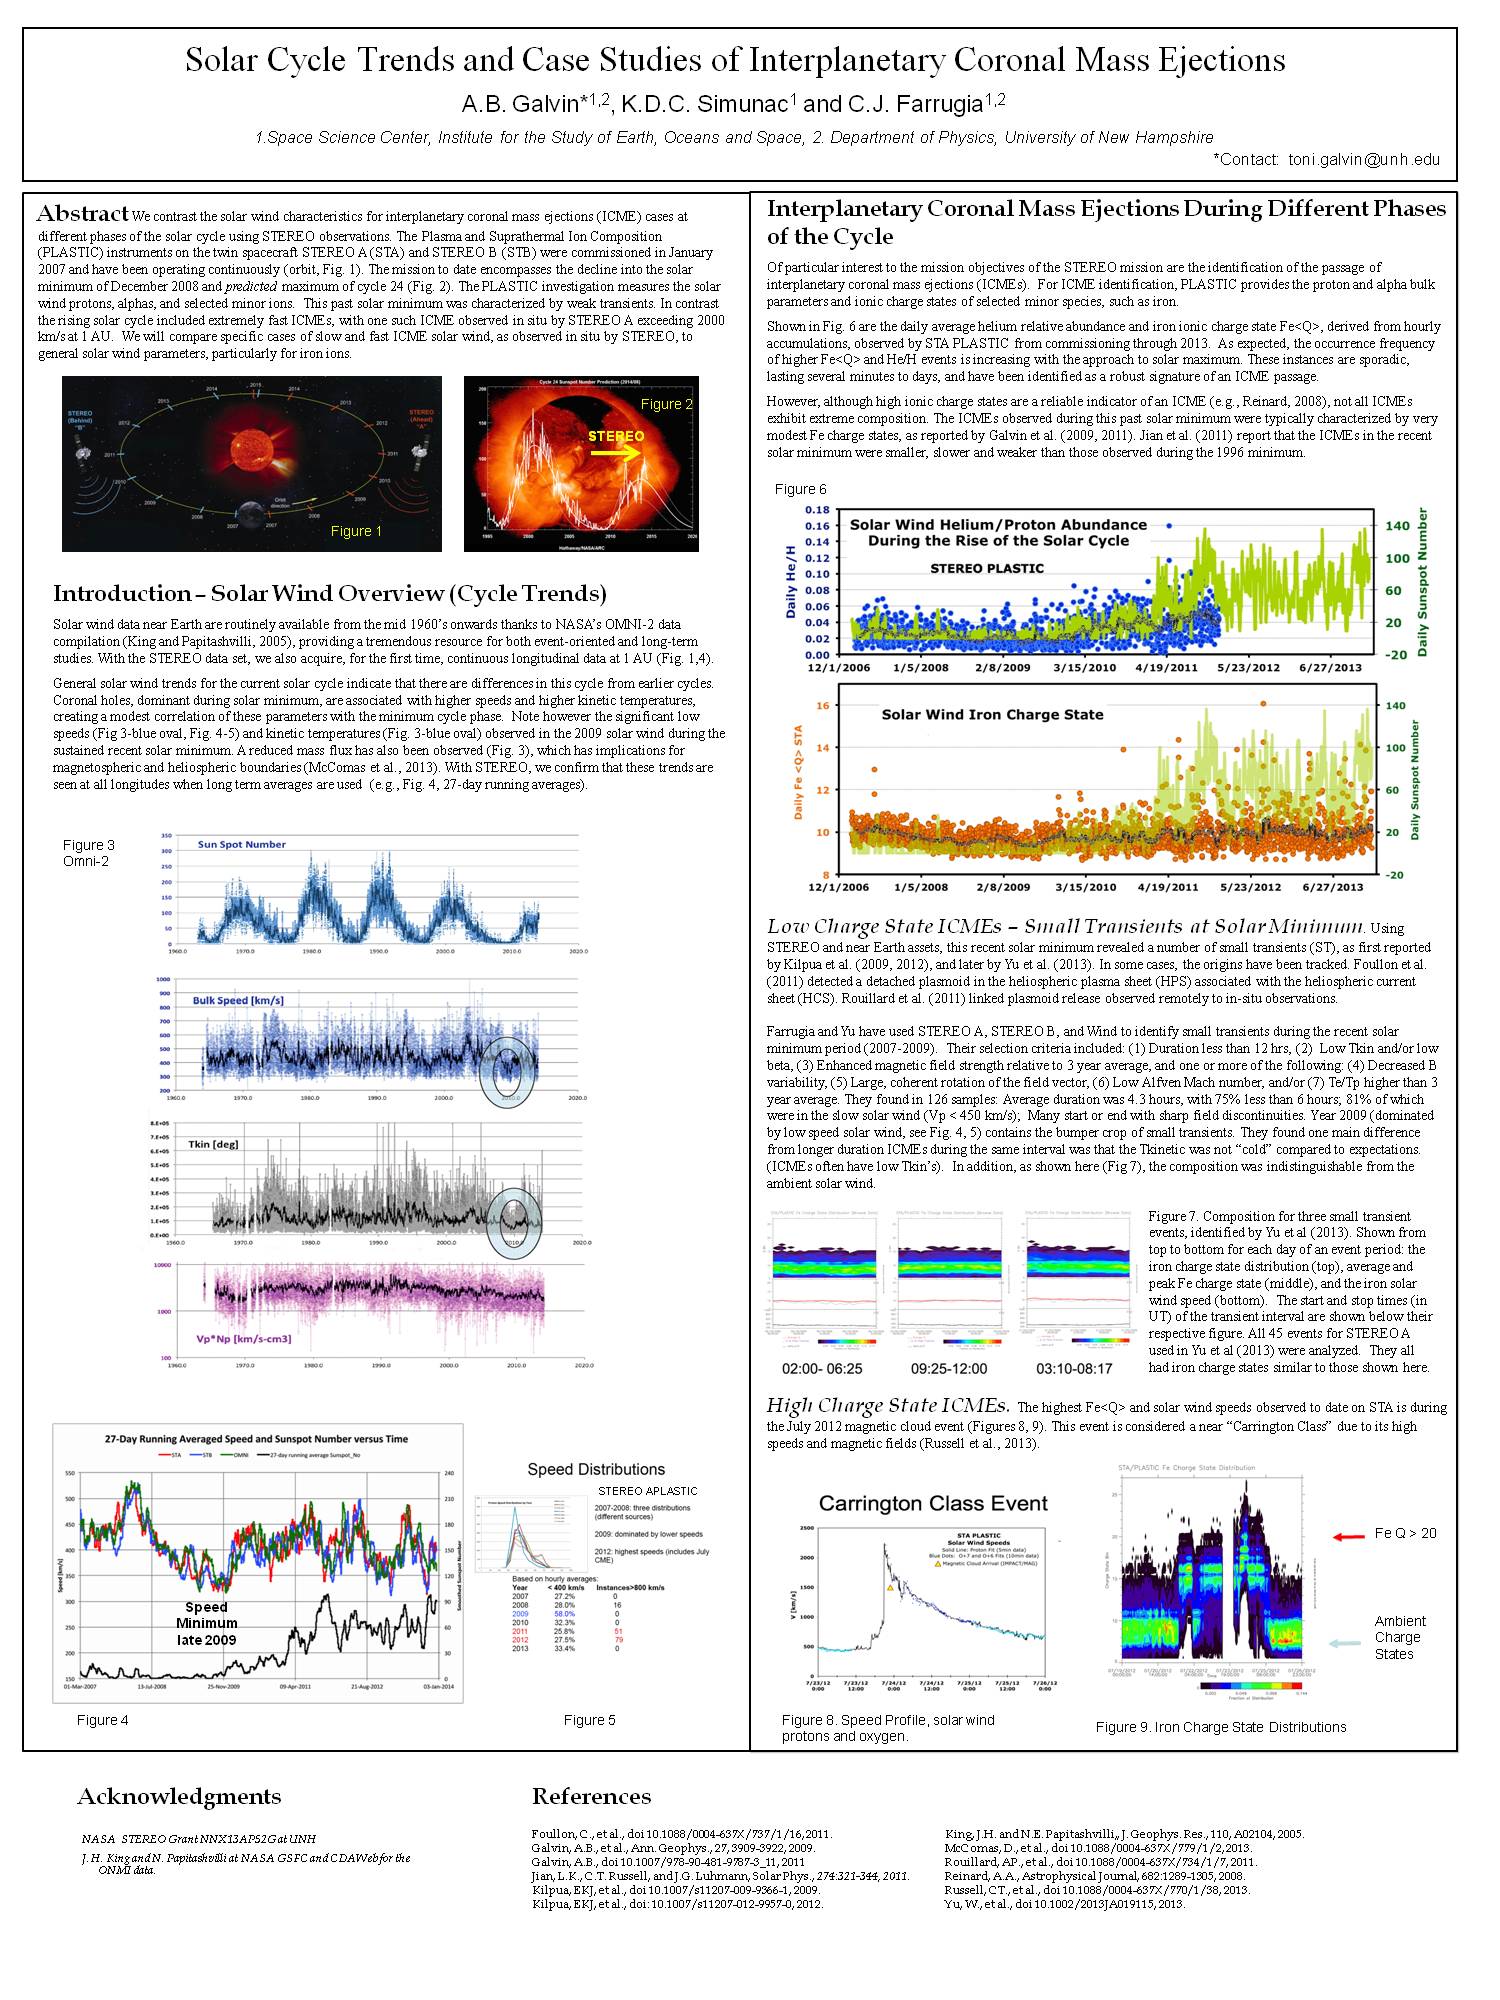 Solar Cycle Trends And Case Studies Of Icmes by Antoinette